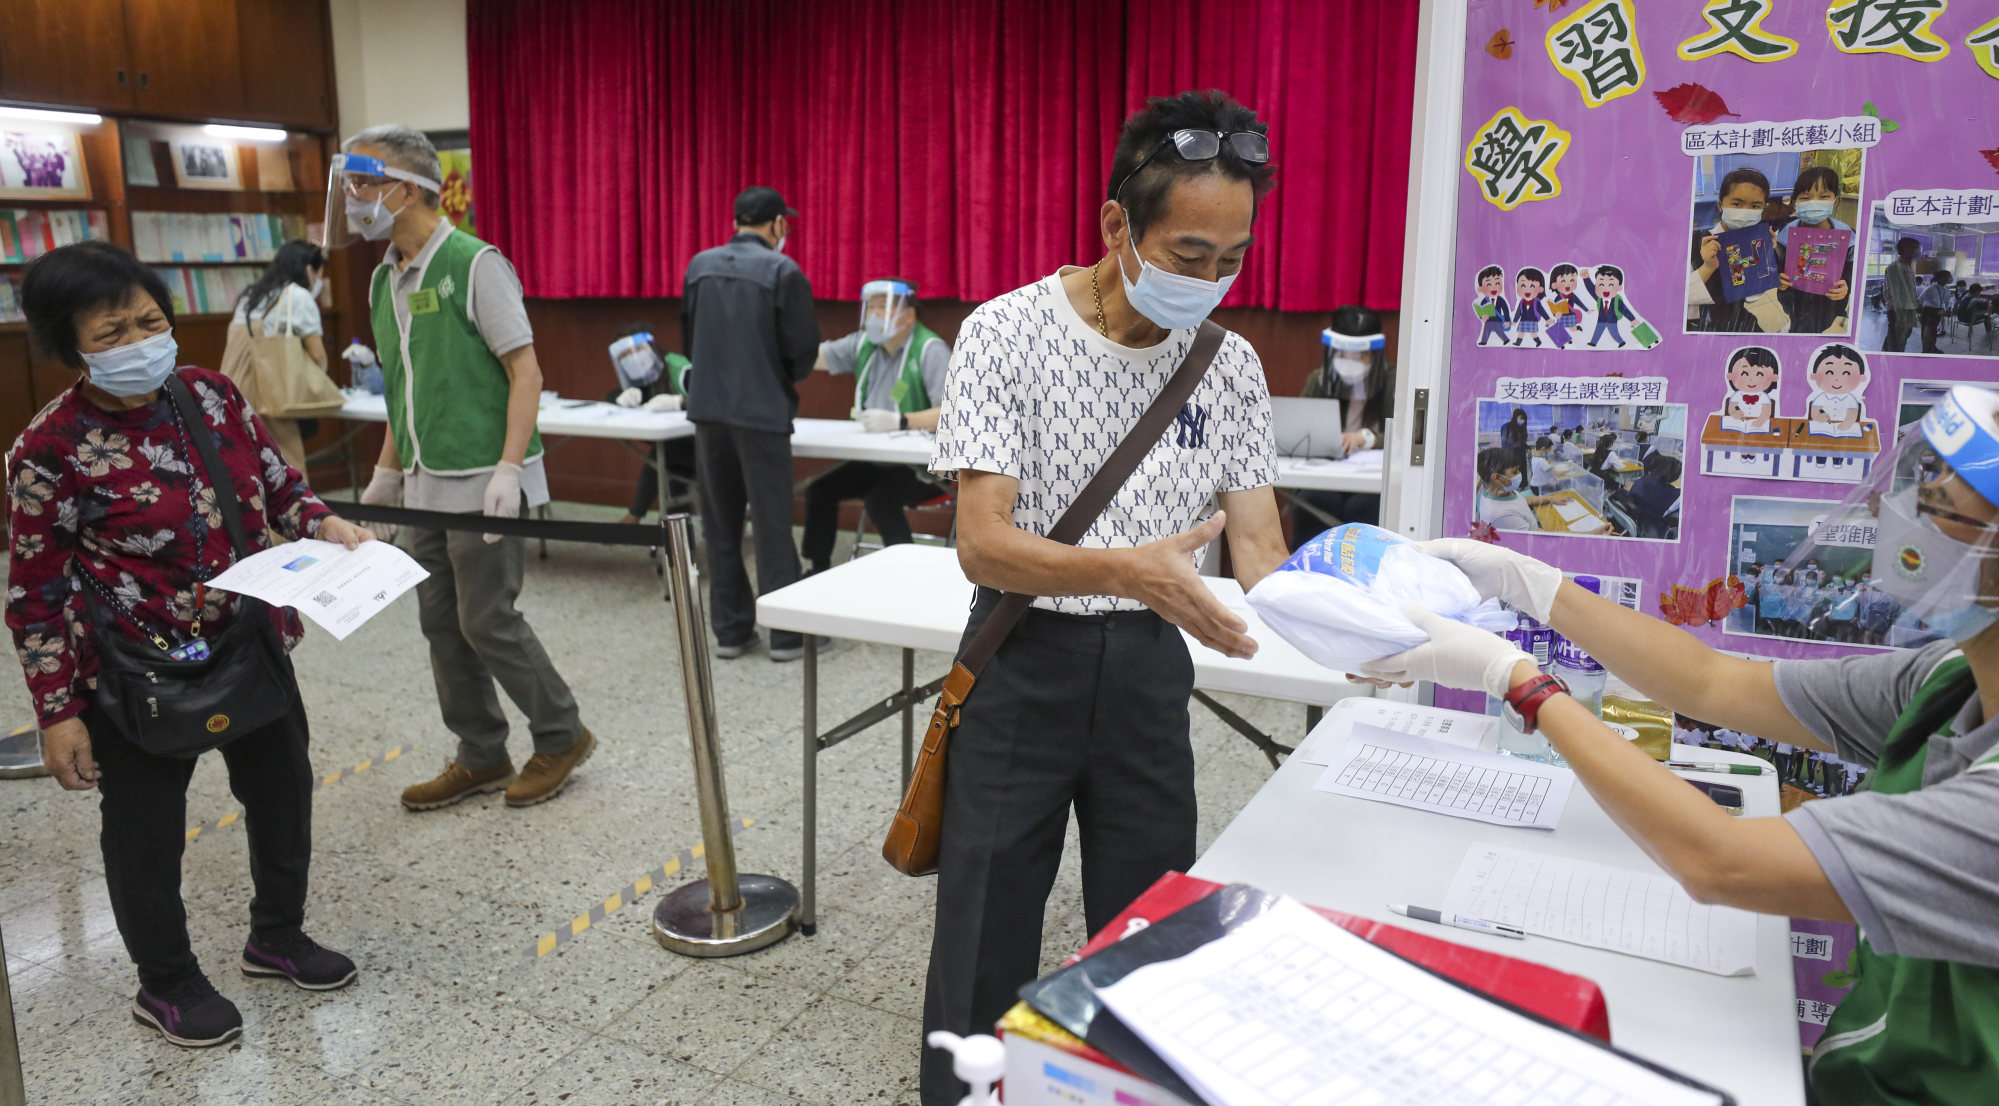 Residents collect anti-epidemic service bags from a centre in Sham Shui Po. Photo: Xiaomei Chen